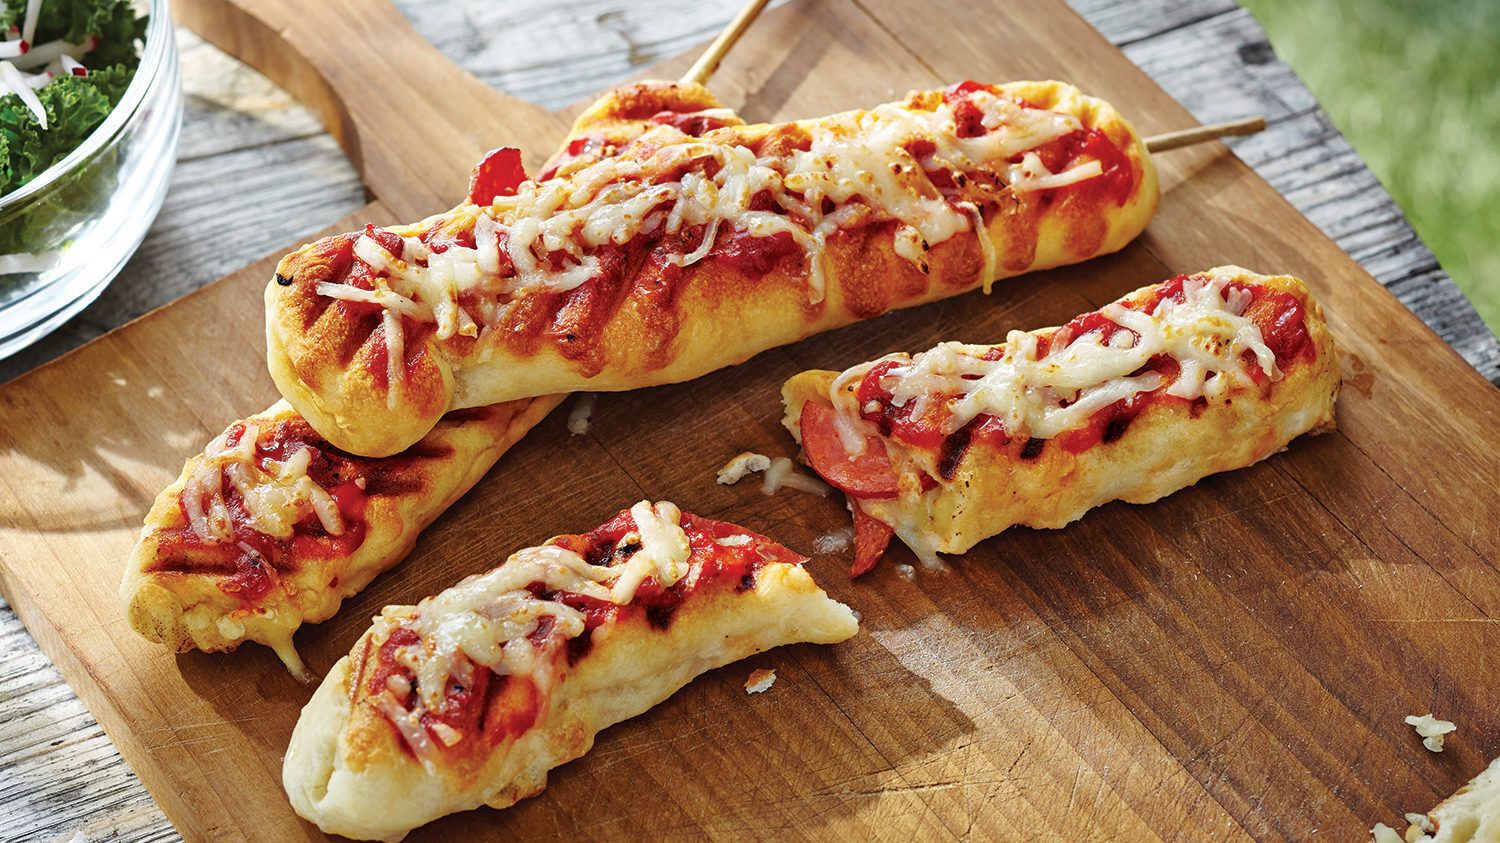 Barbecue Pizza Skewers